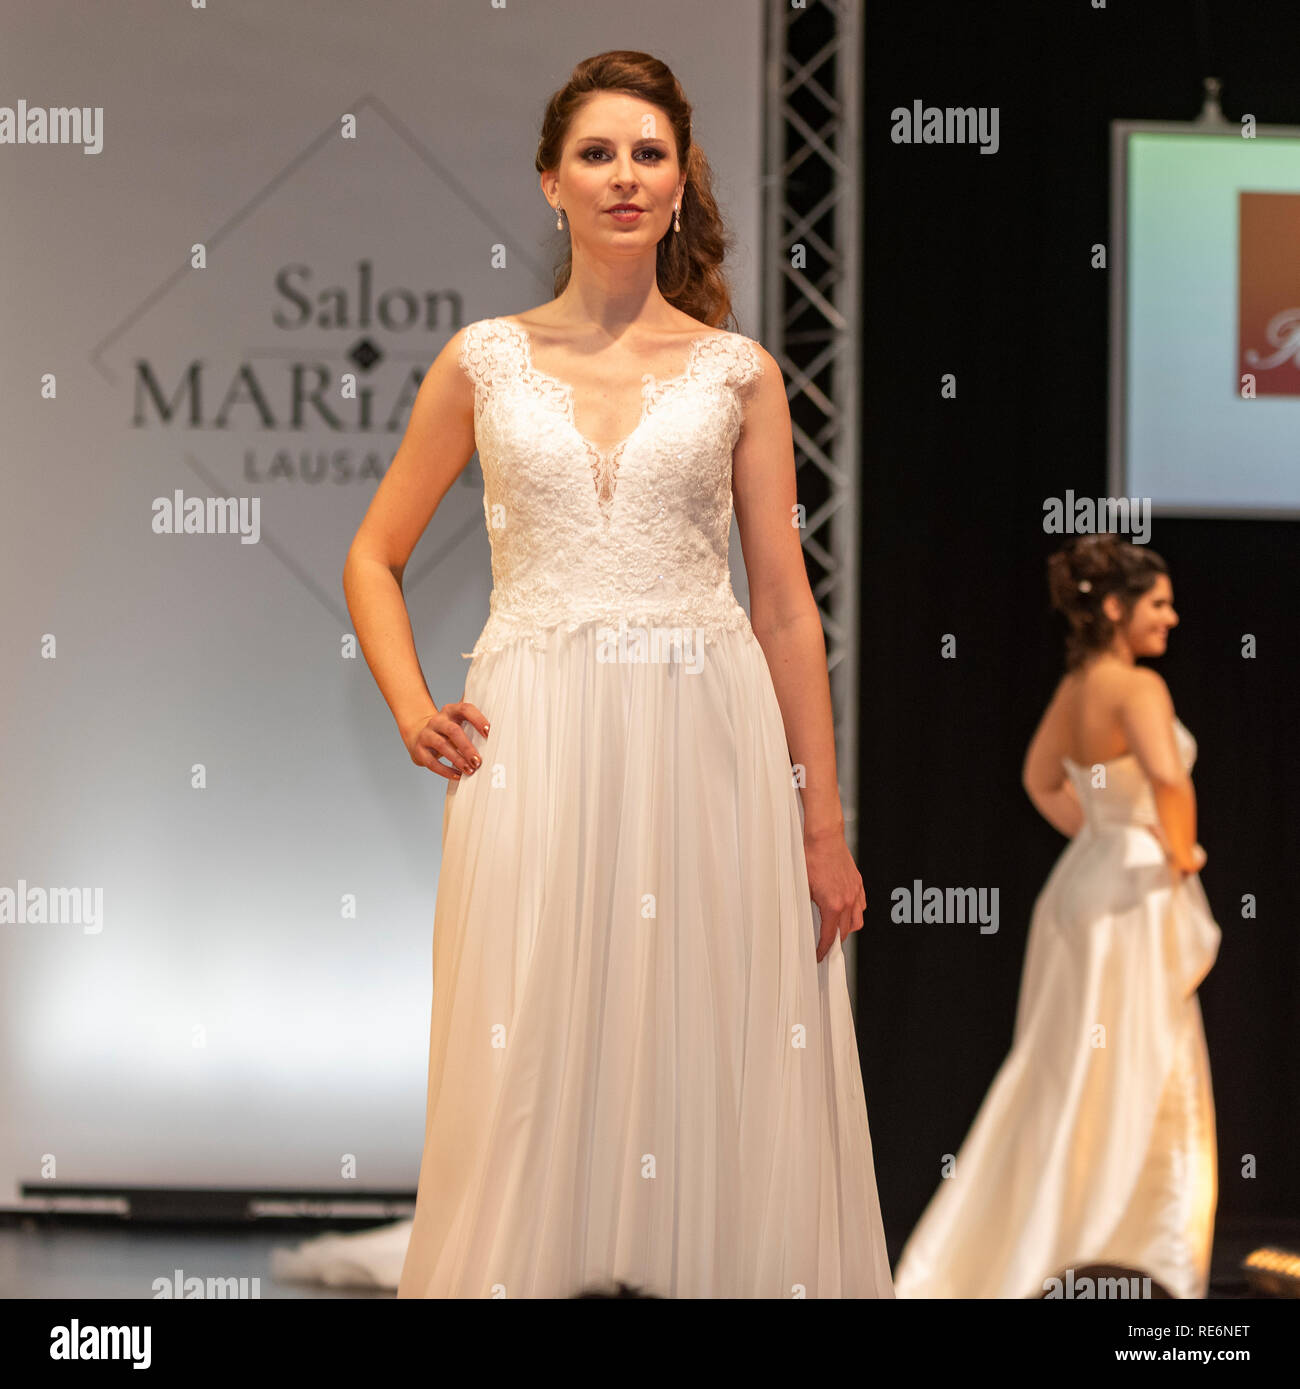 Lausanne, Switzerland. 20th Jan, 2019. Model wearing the new wedding solemn wedding dress collection 2019 at the Baulieu Expo in Lausanne, in Switzerland. Lausanne, Switzerland on the 20 th January, 2019. Credit: Eric Dubost/Alamy Live News. Stock Photo